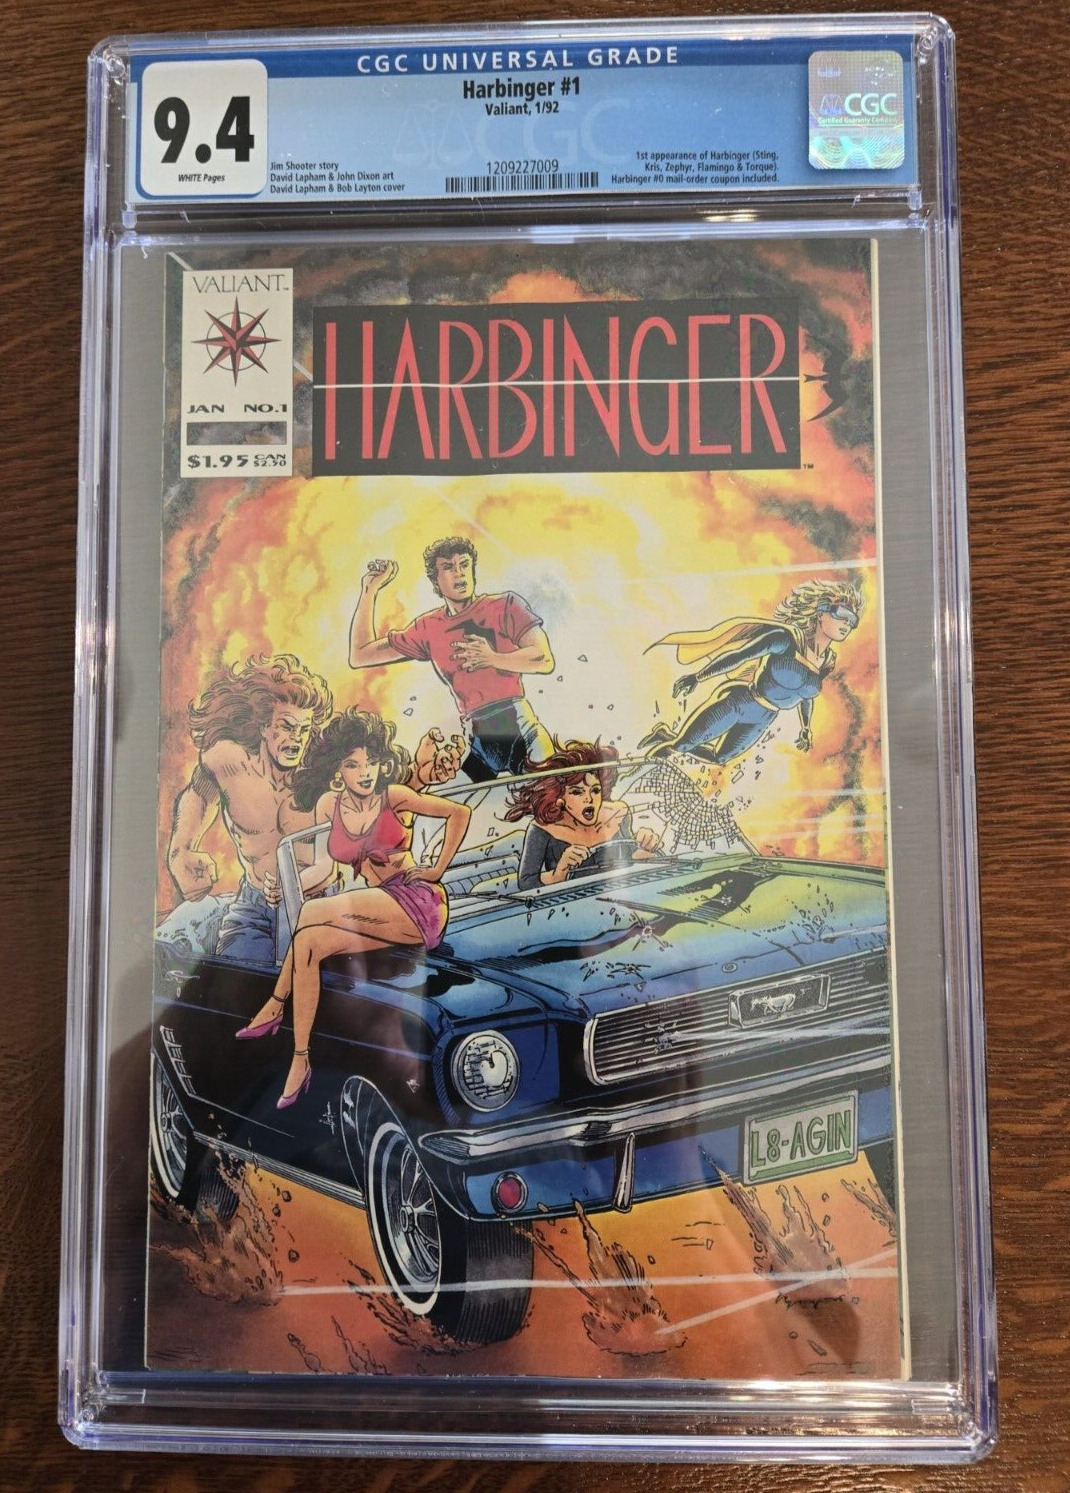 HARBINGER #1 CGC 9.4 WHITE Pages